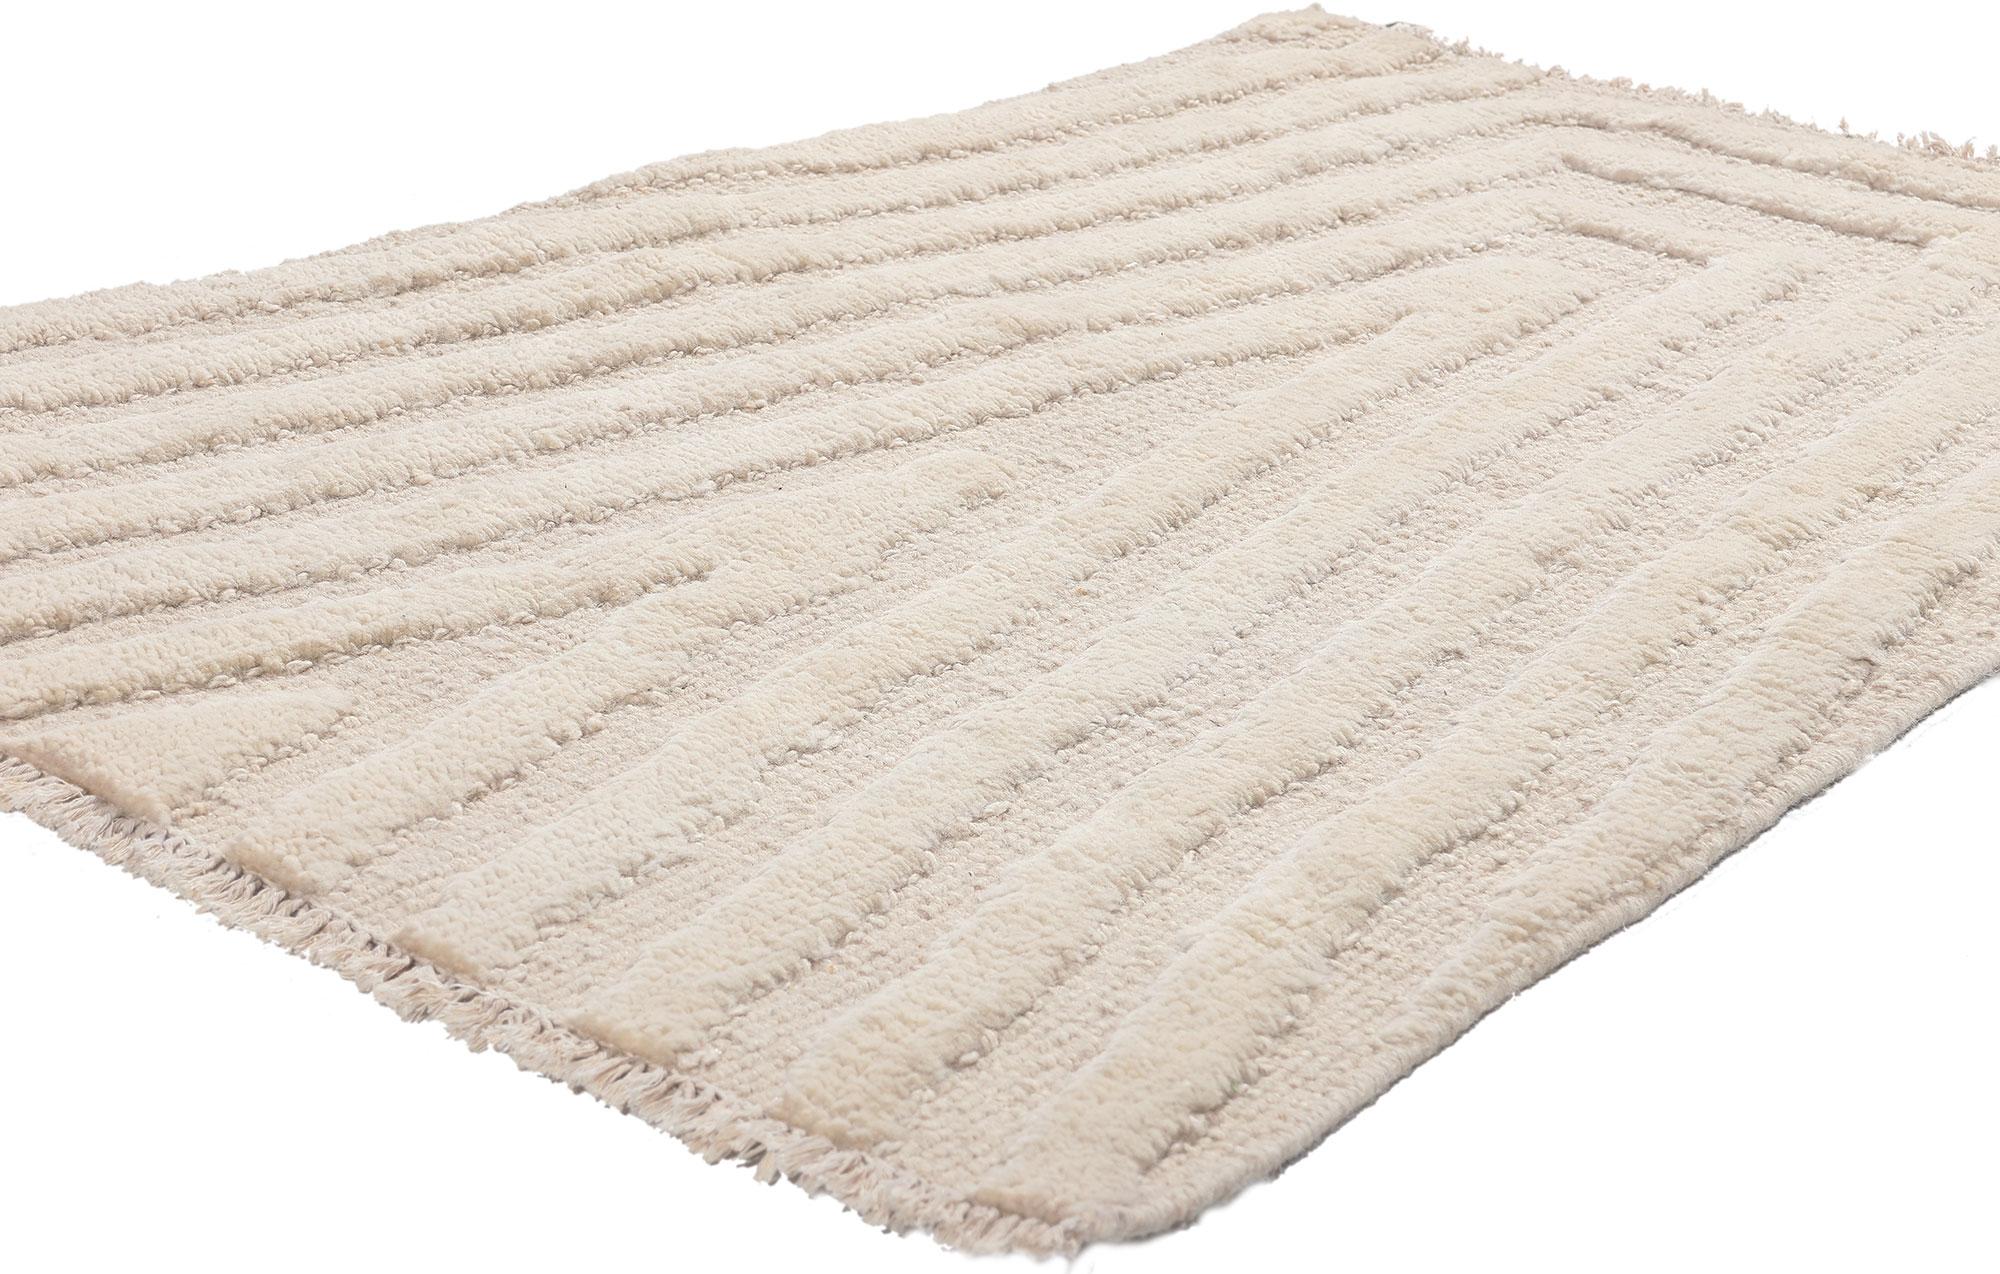 81016 Modern Ivory Moroccan High-Low Rug, 03'01 x 04'11. ?With its simplicity, plush pile, incredible detail and texture, this hand knotted wool contemporary Moroccan rug is a captivating vision of woven beauty. The abrashed field features an